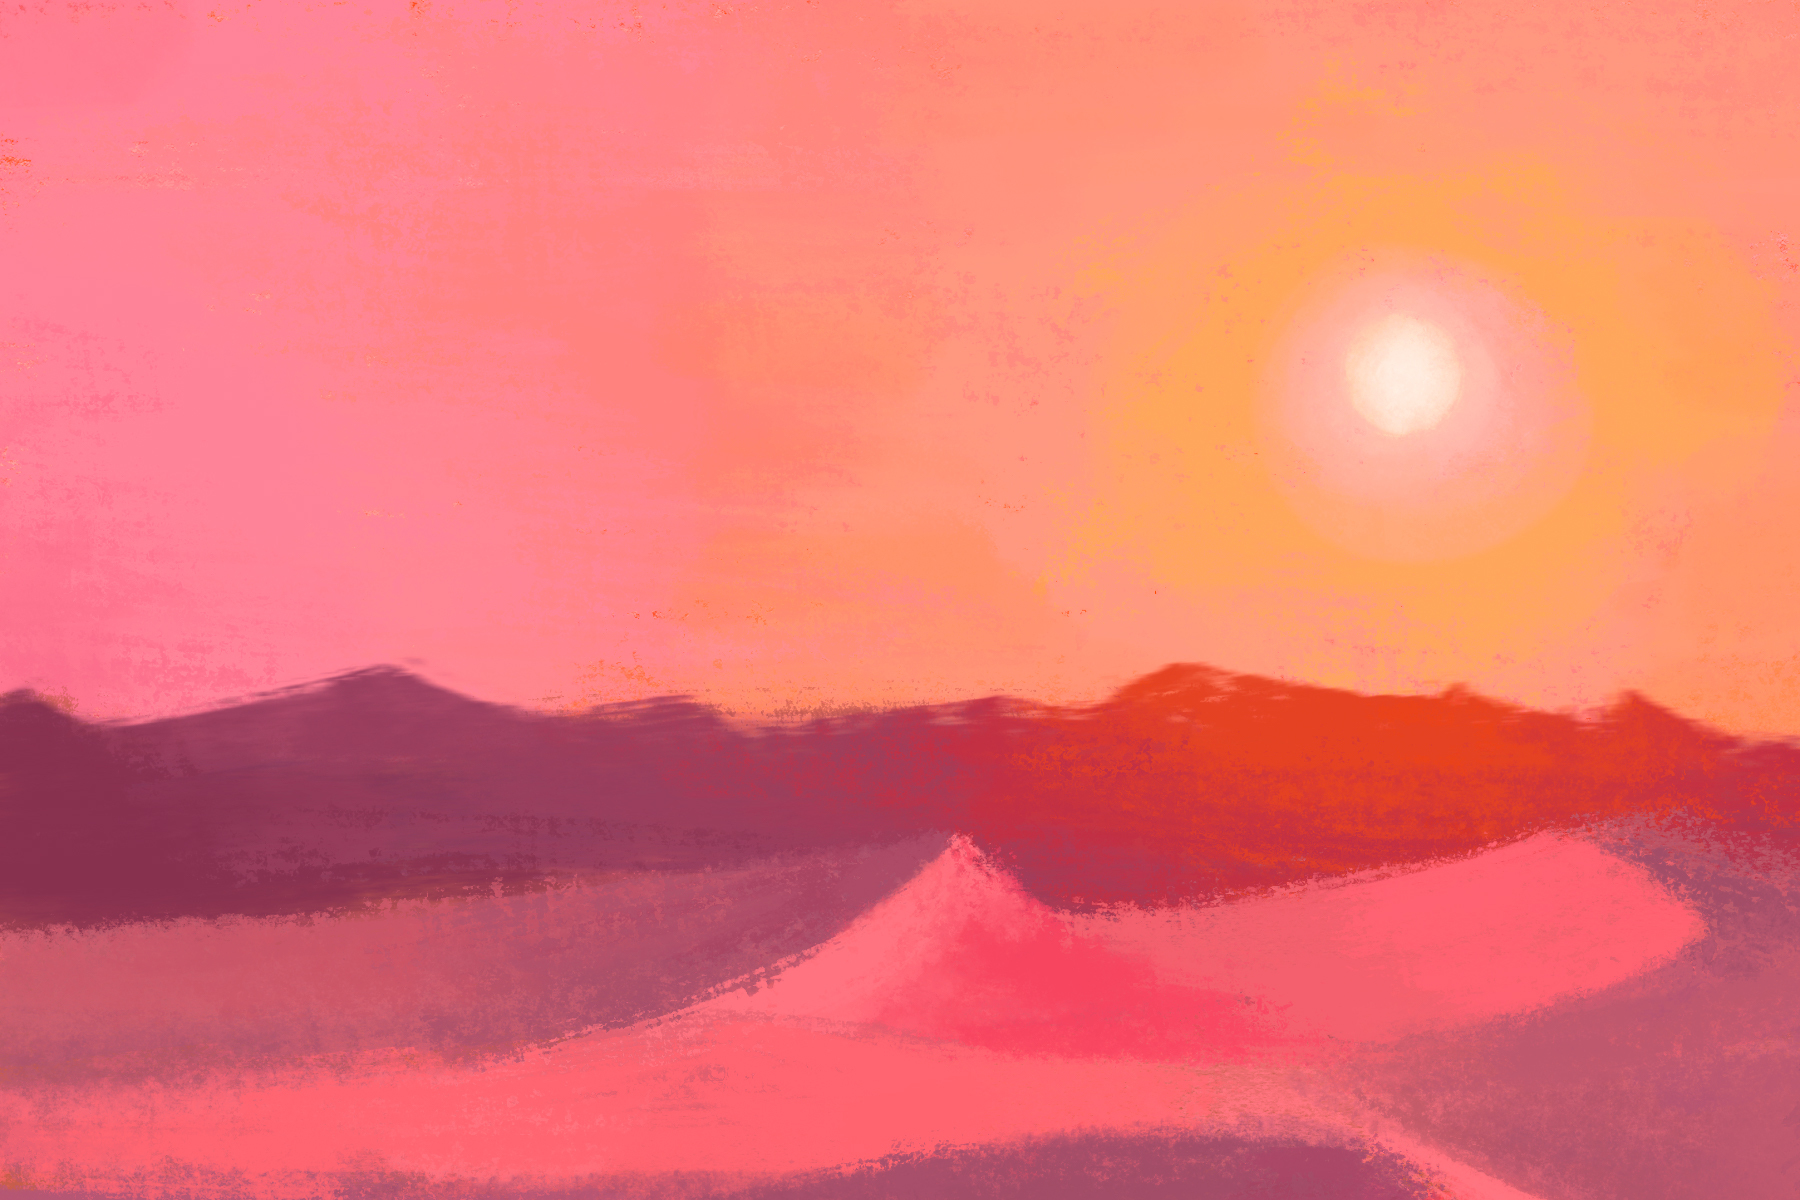 In an article about Dune, a desert landscape with the sun in the sky